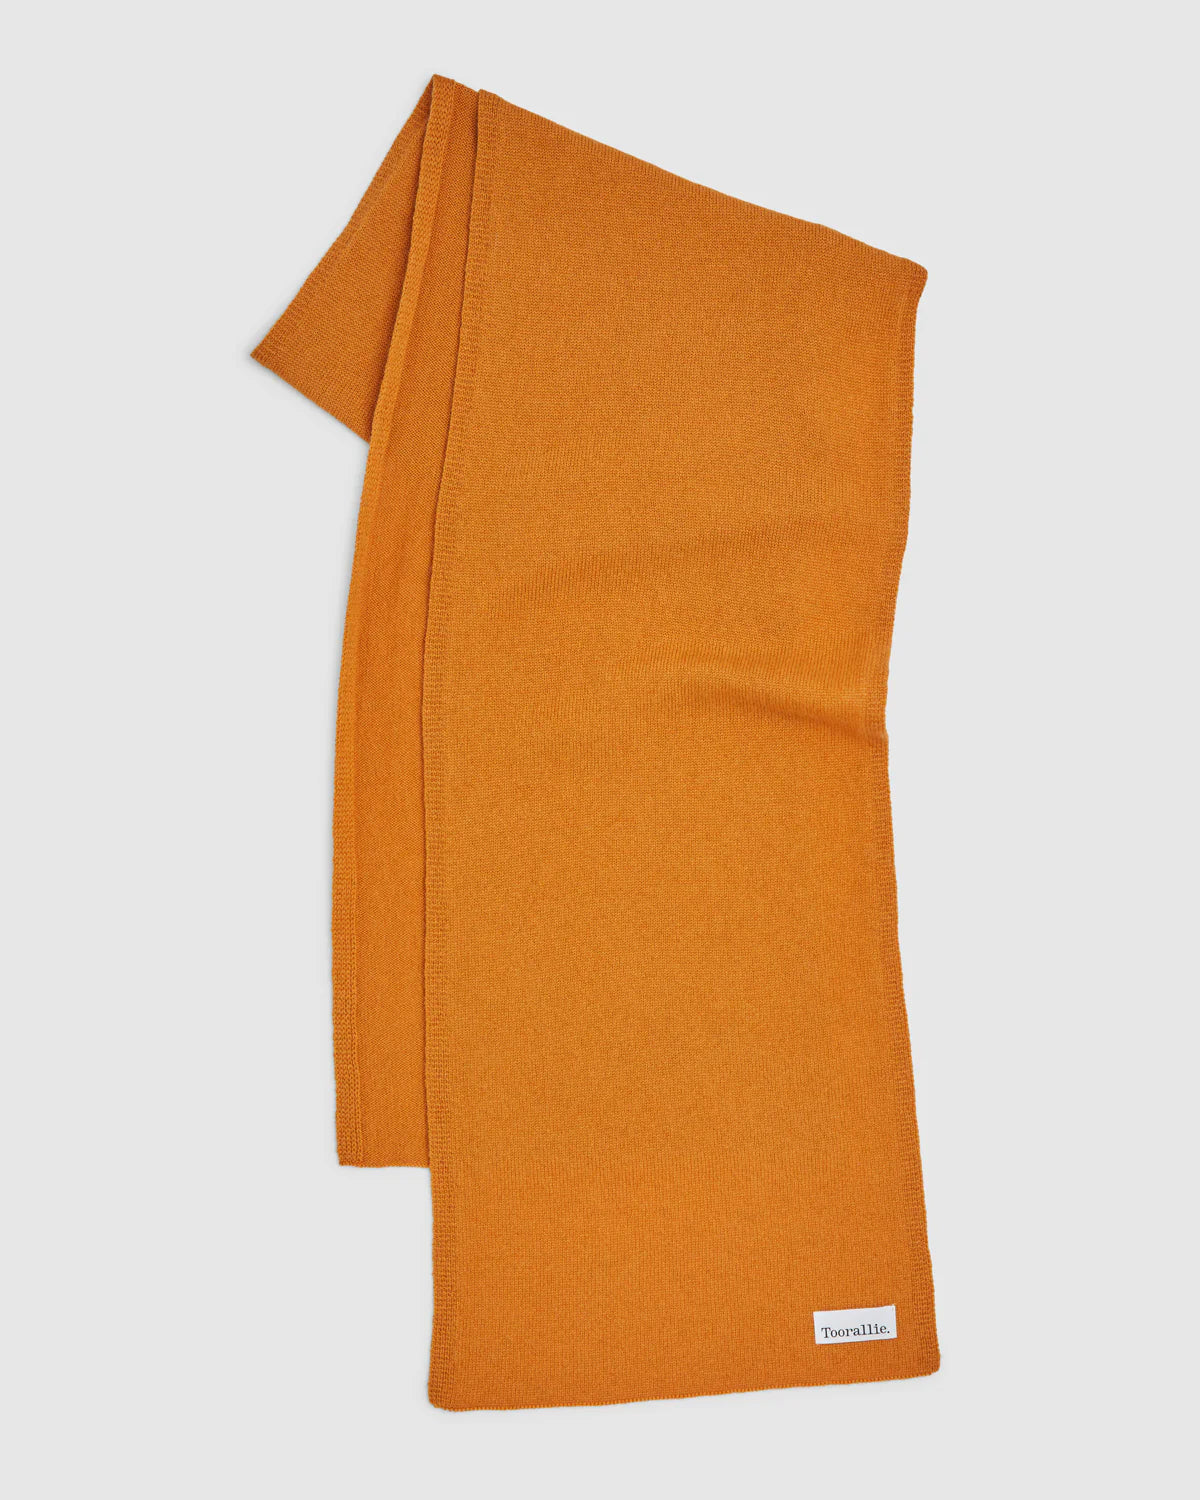 Wrap yourself in luxury with our Mandarin Merino Lambswool Scarf. Soft, stylish, and irresistibly warm. Shop now!